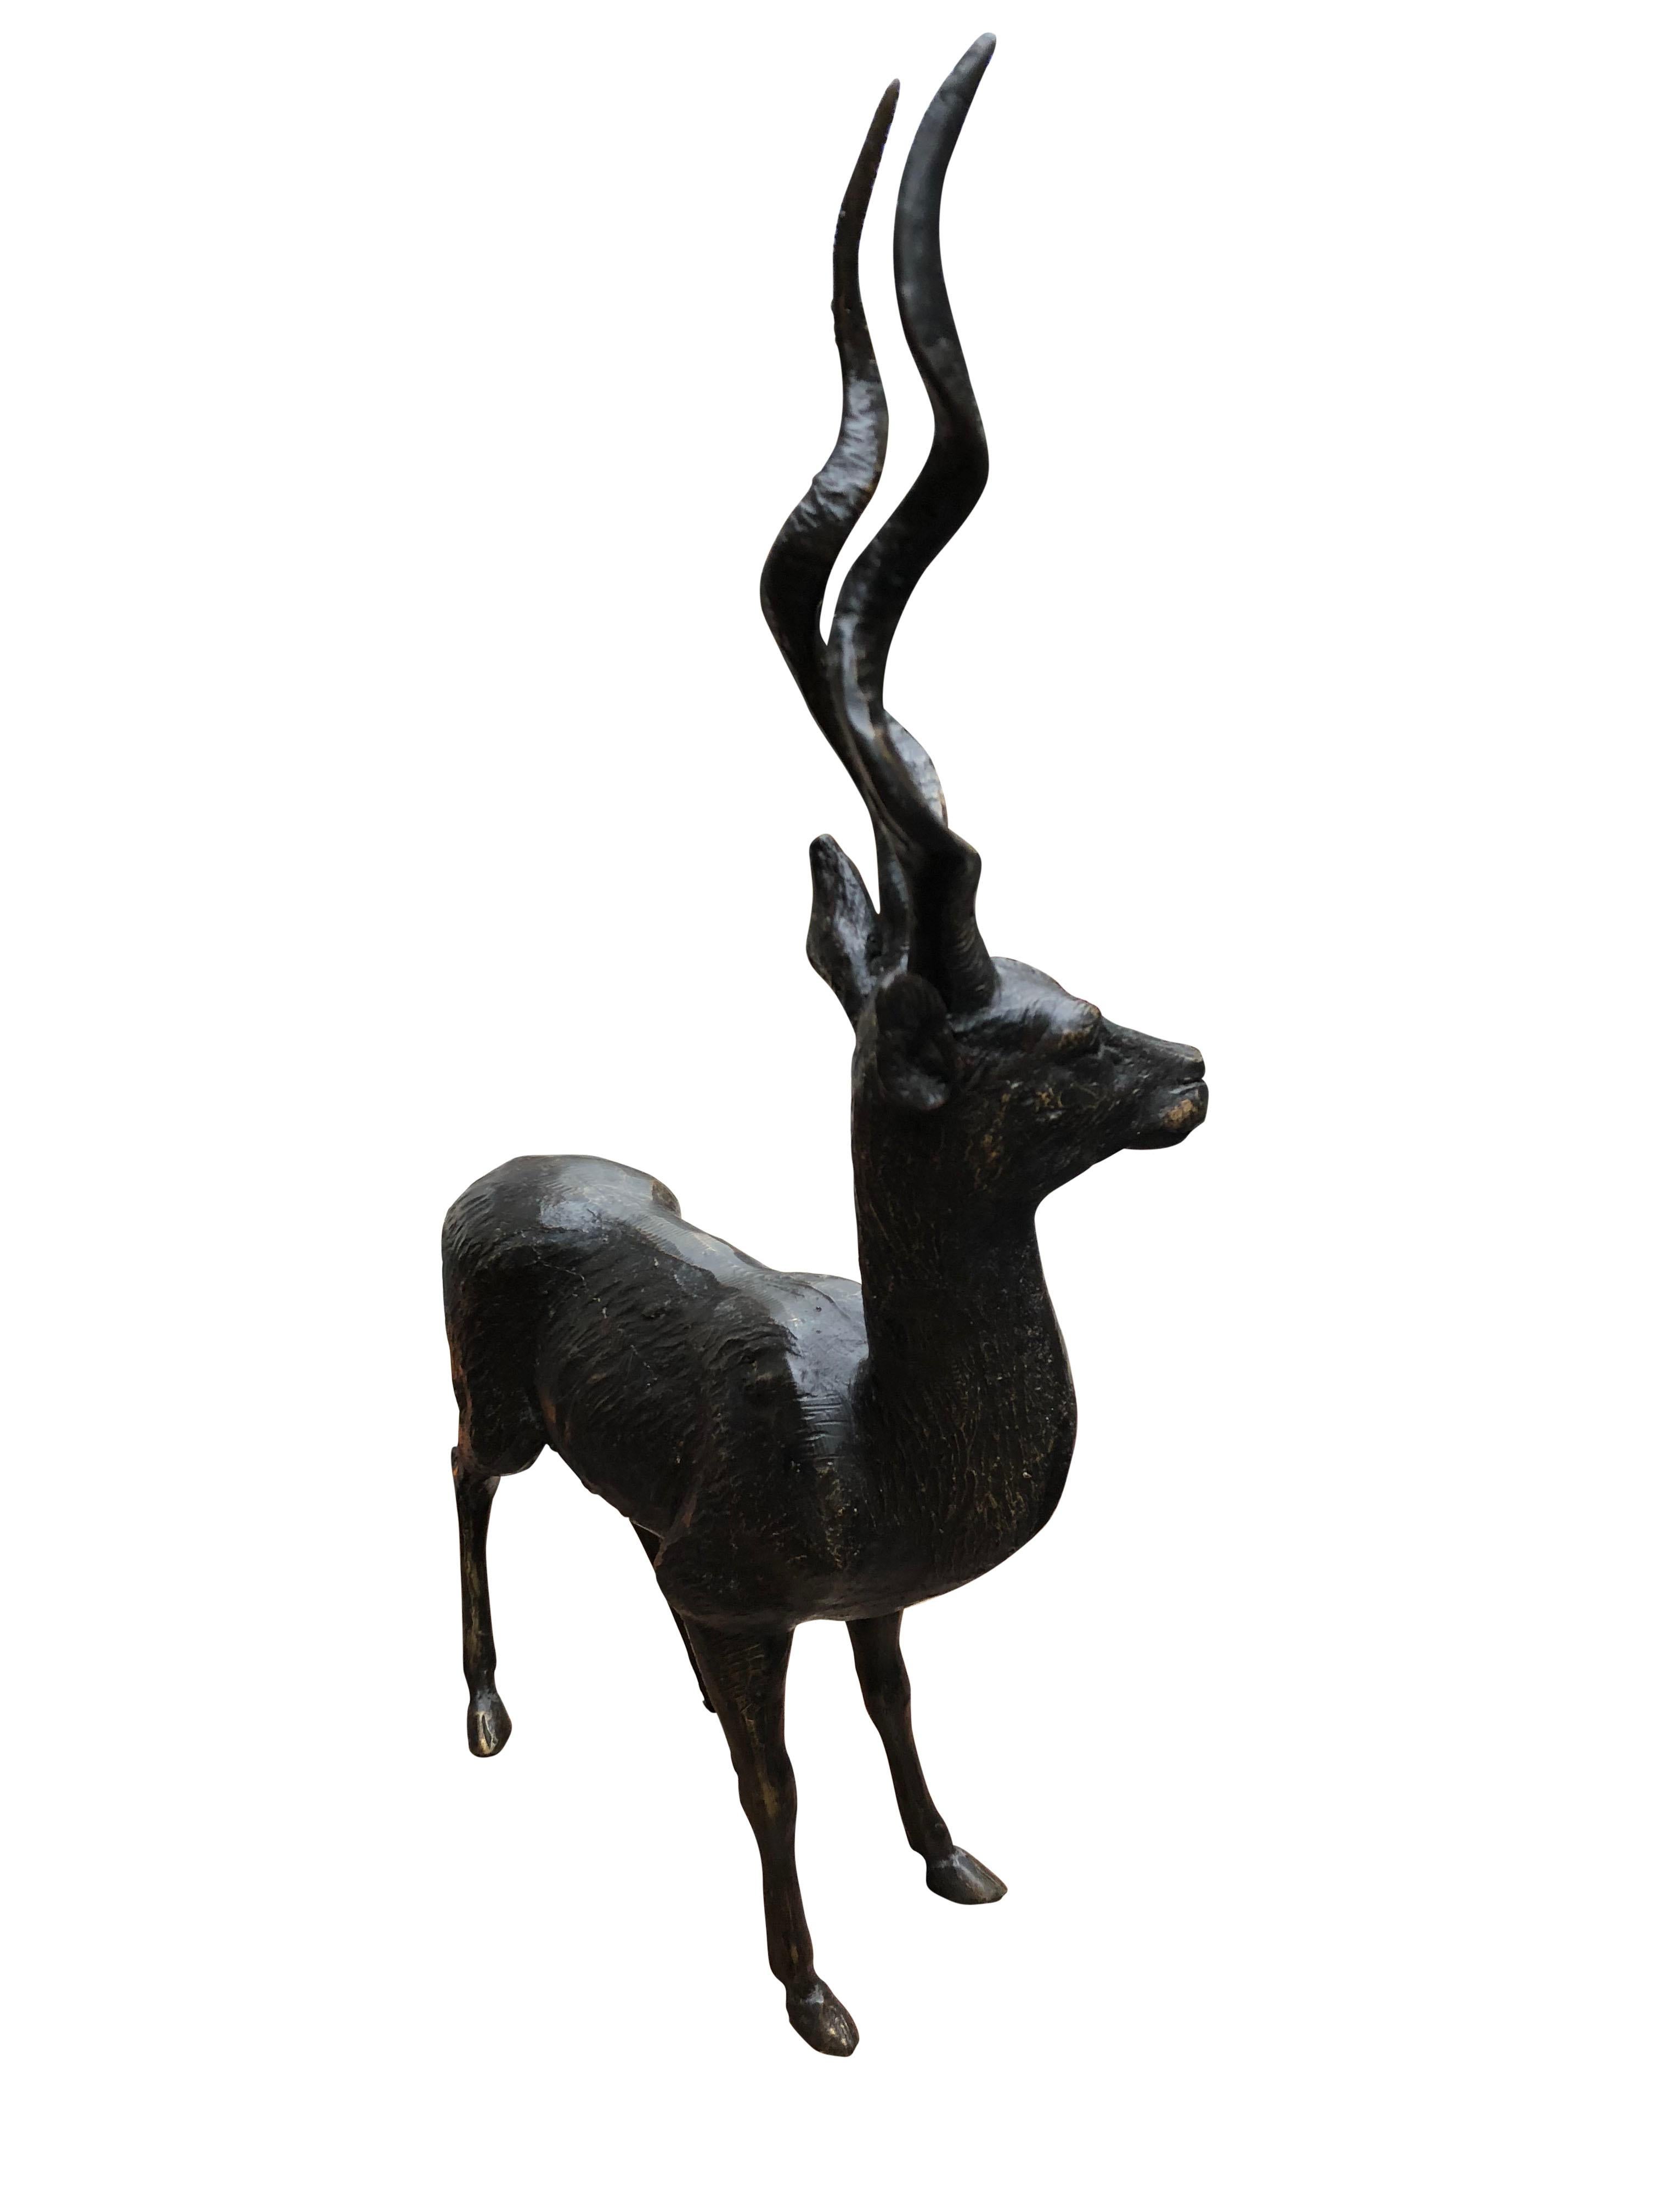 A Gorgeous Bronze Casting Of An African Antelope. The bronze is of the highest quality with a luxurious deep brown patina to it. He stands tall and proud with lovely curled horns, caught with skill by the artist. It would make for a great,